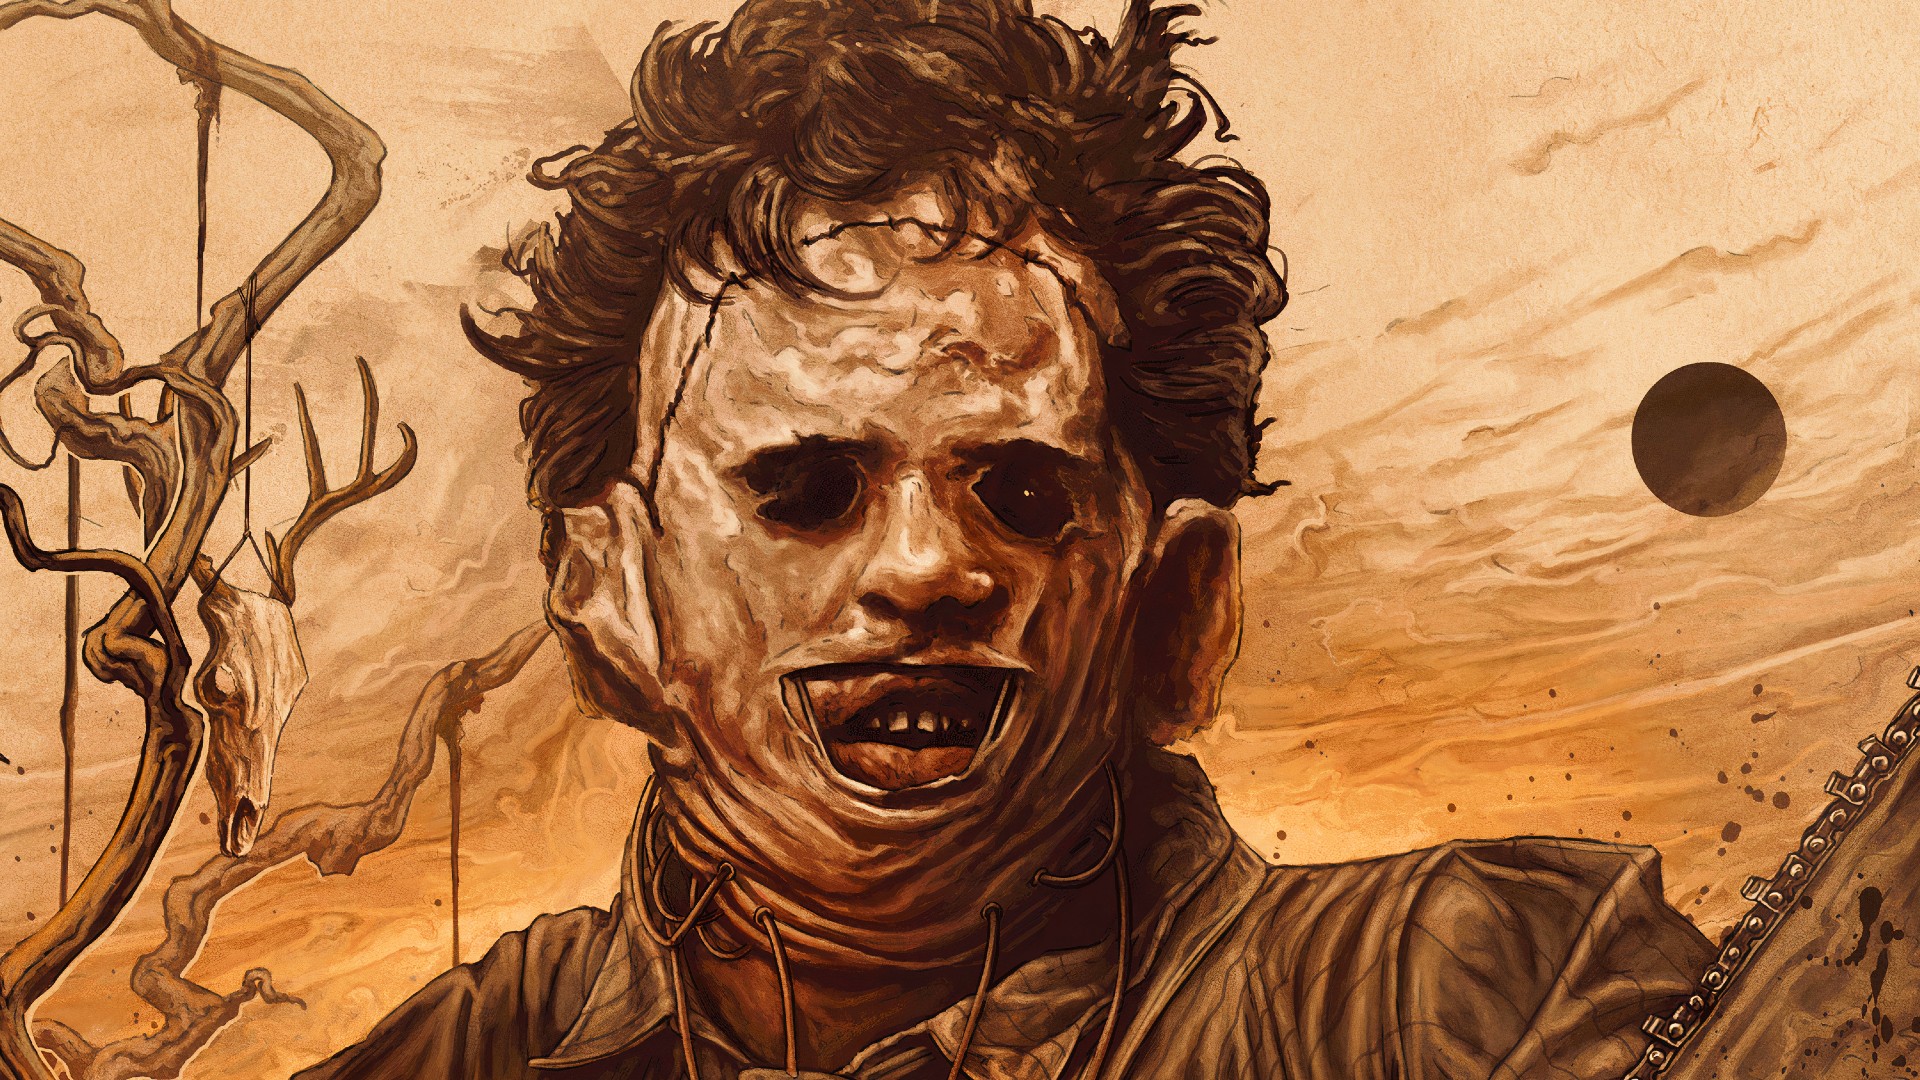 Is the Texas Chainsaw Massacre Story Real? - Texas Chainsaw